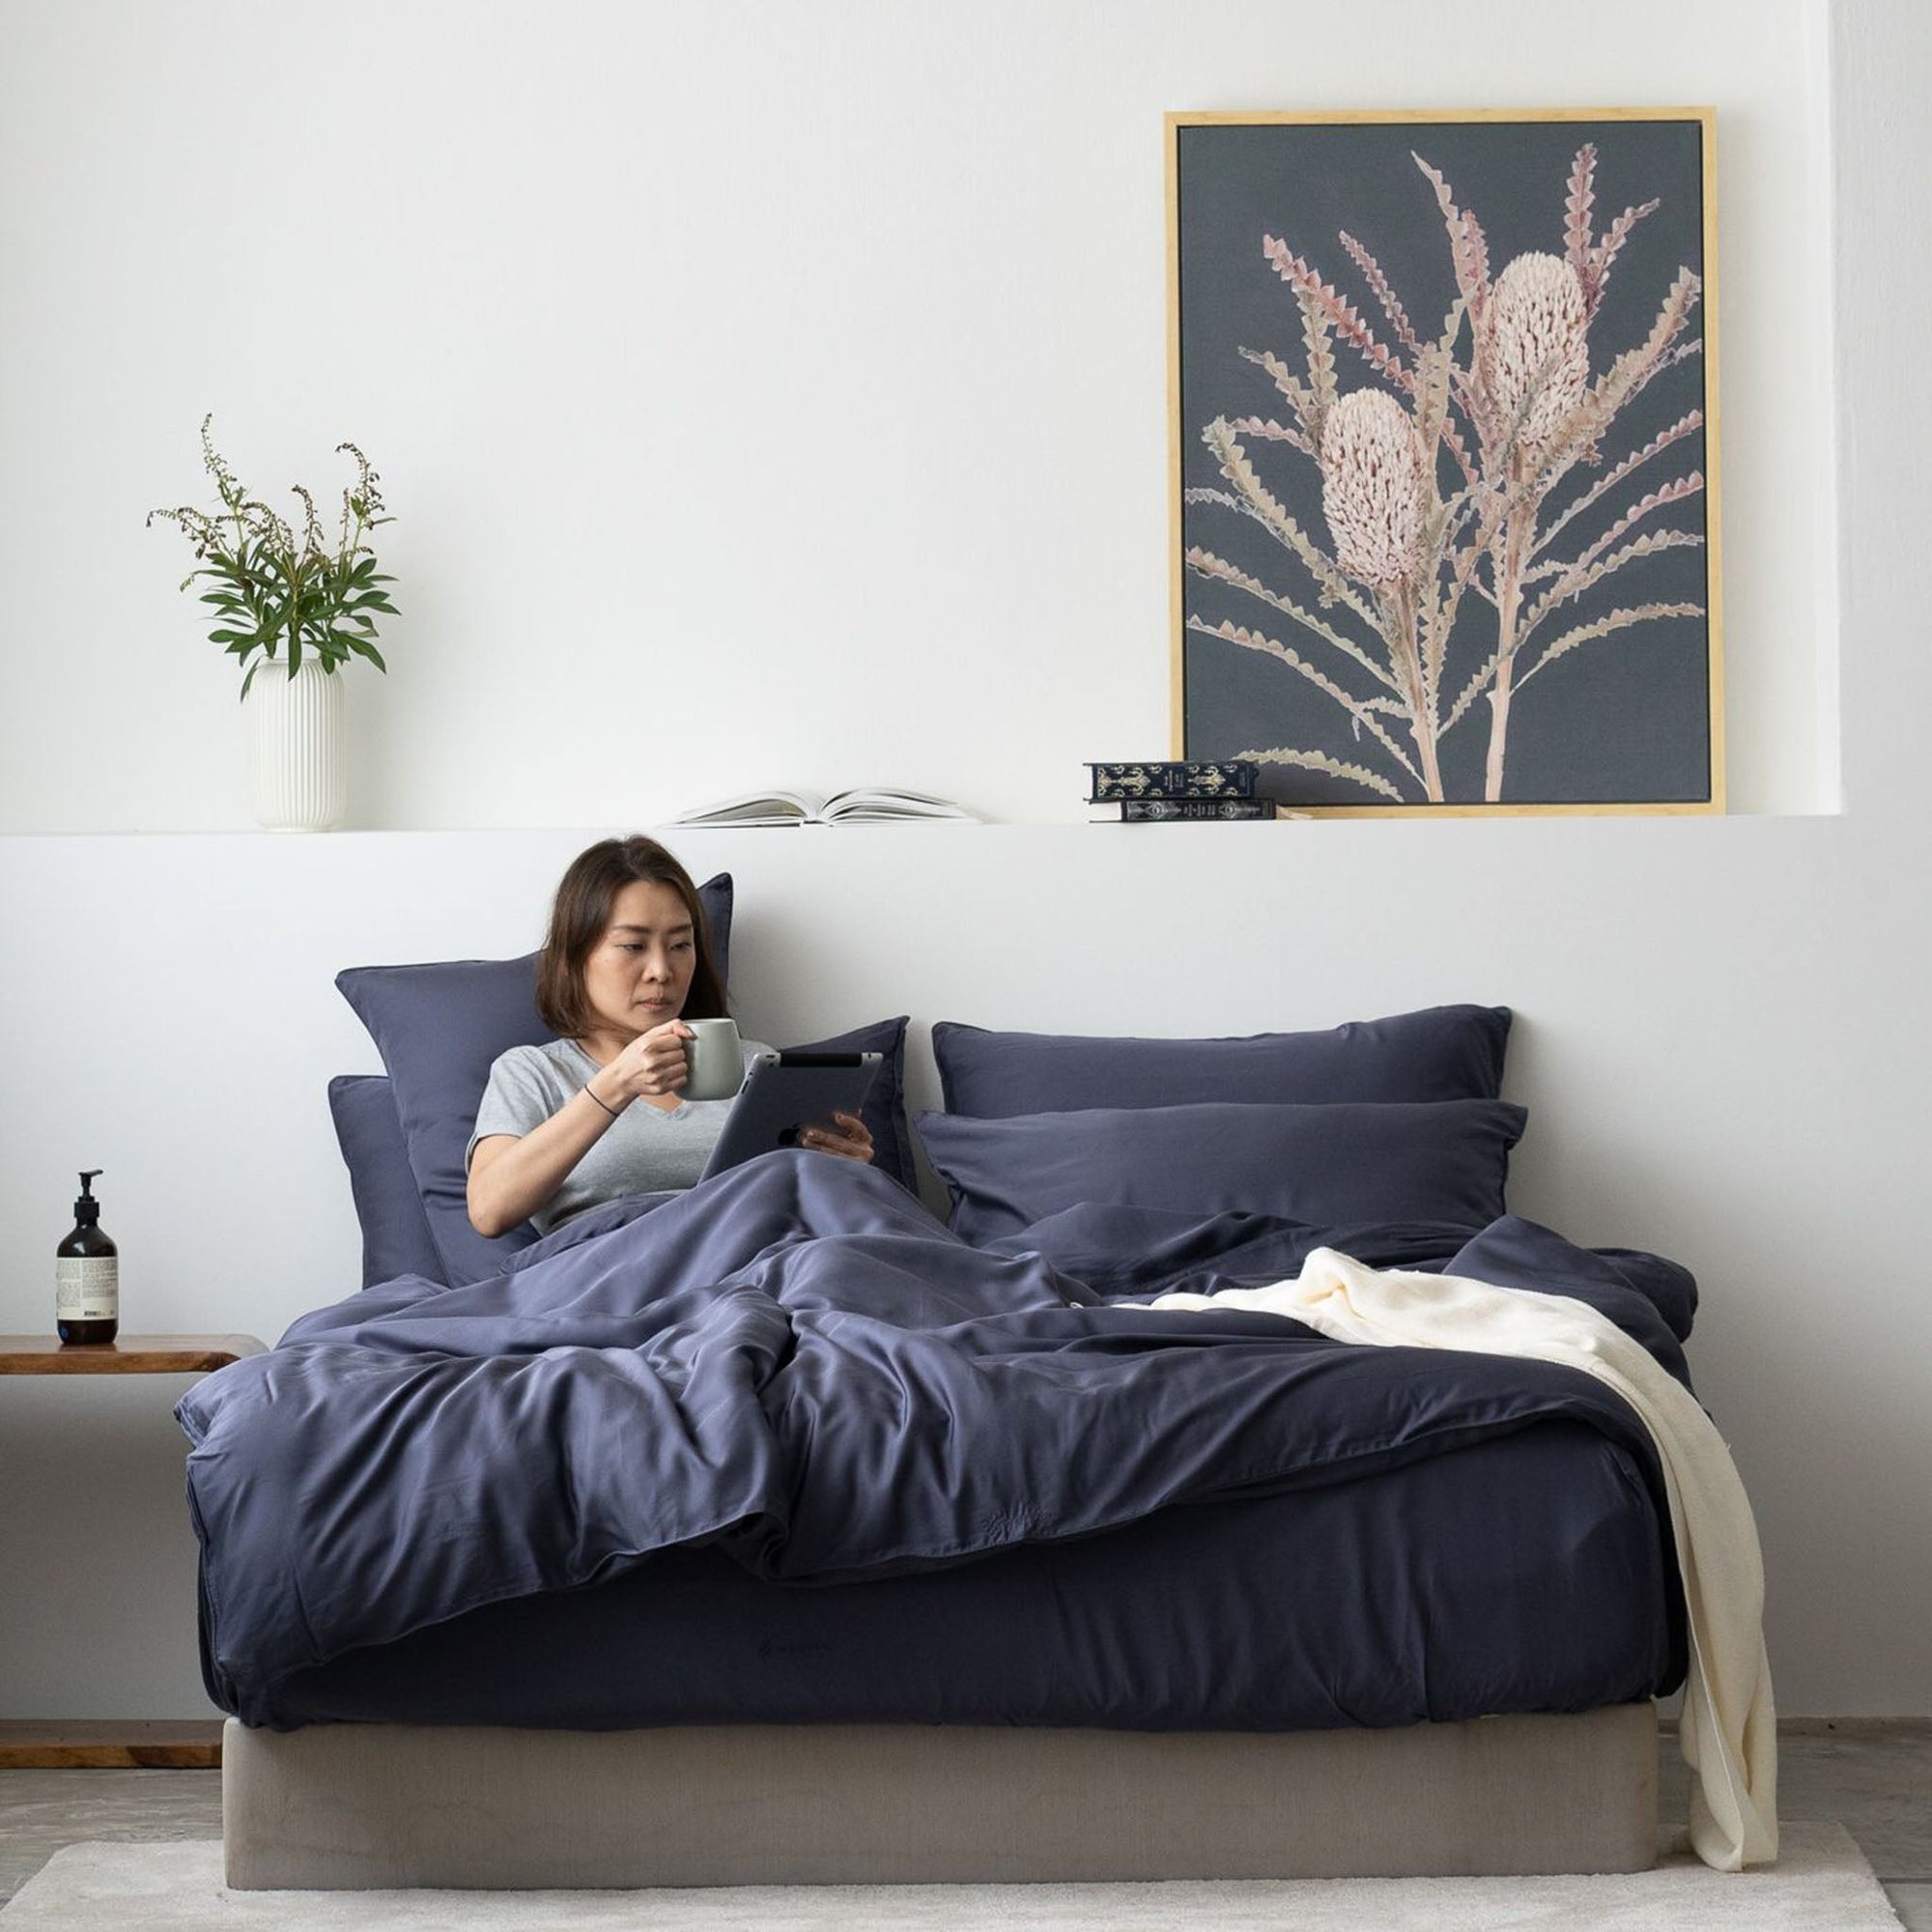 Dark Blue TENCEL Bed Sheets Deluxe Set with Tencel Fitted Sheet, Tencel Pillow Case, Tencel Bolster Case, Tencel Duvet Cover. Buy Dark Blue Bed Sheets at Weavve Home, Best Bed Sheets Singapore and Luxury Hotel Sheets. 400 High Thread Count Bed Sheet. 